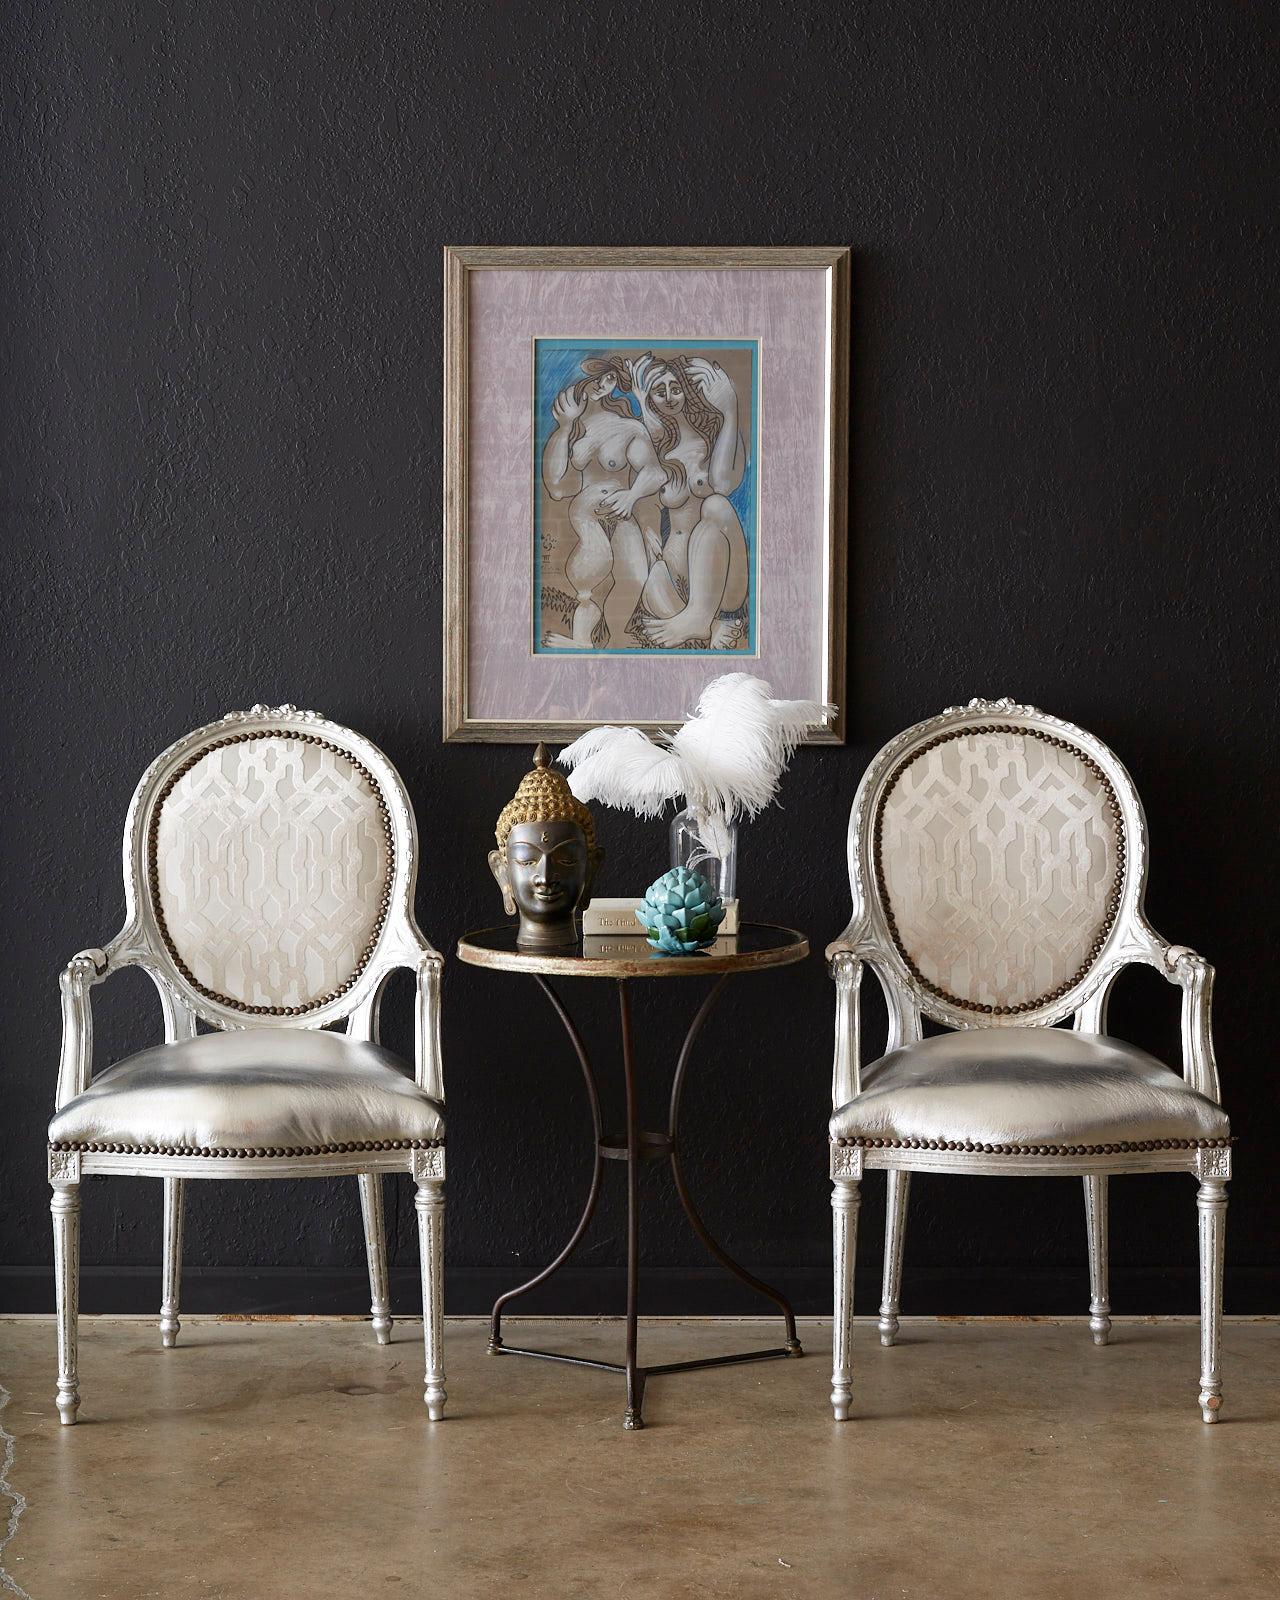 Dazzling pair of French armchairs featuring carved Louis XVI style frames that have been painstakingly silver leaf finished by hand. The frames have been upholstered with a matching silver metallic fabric on the seat and a Schumacher style geometric